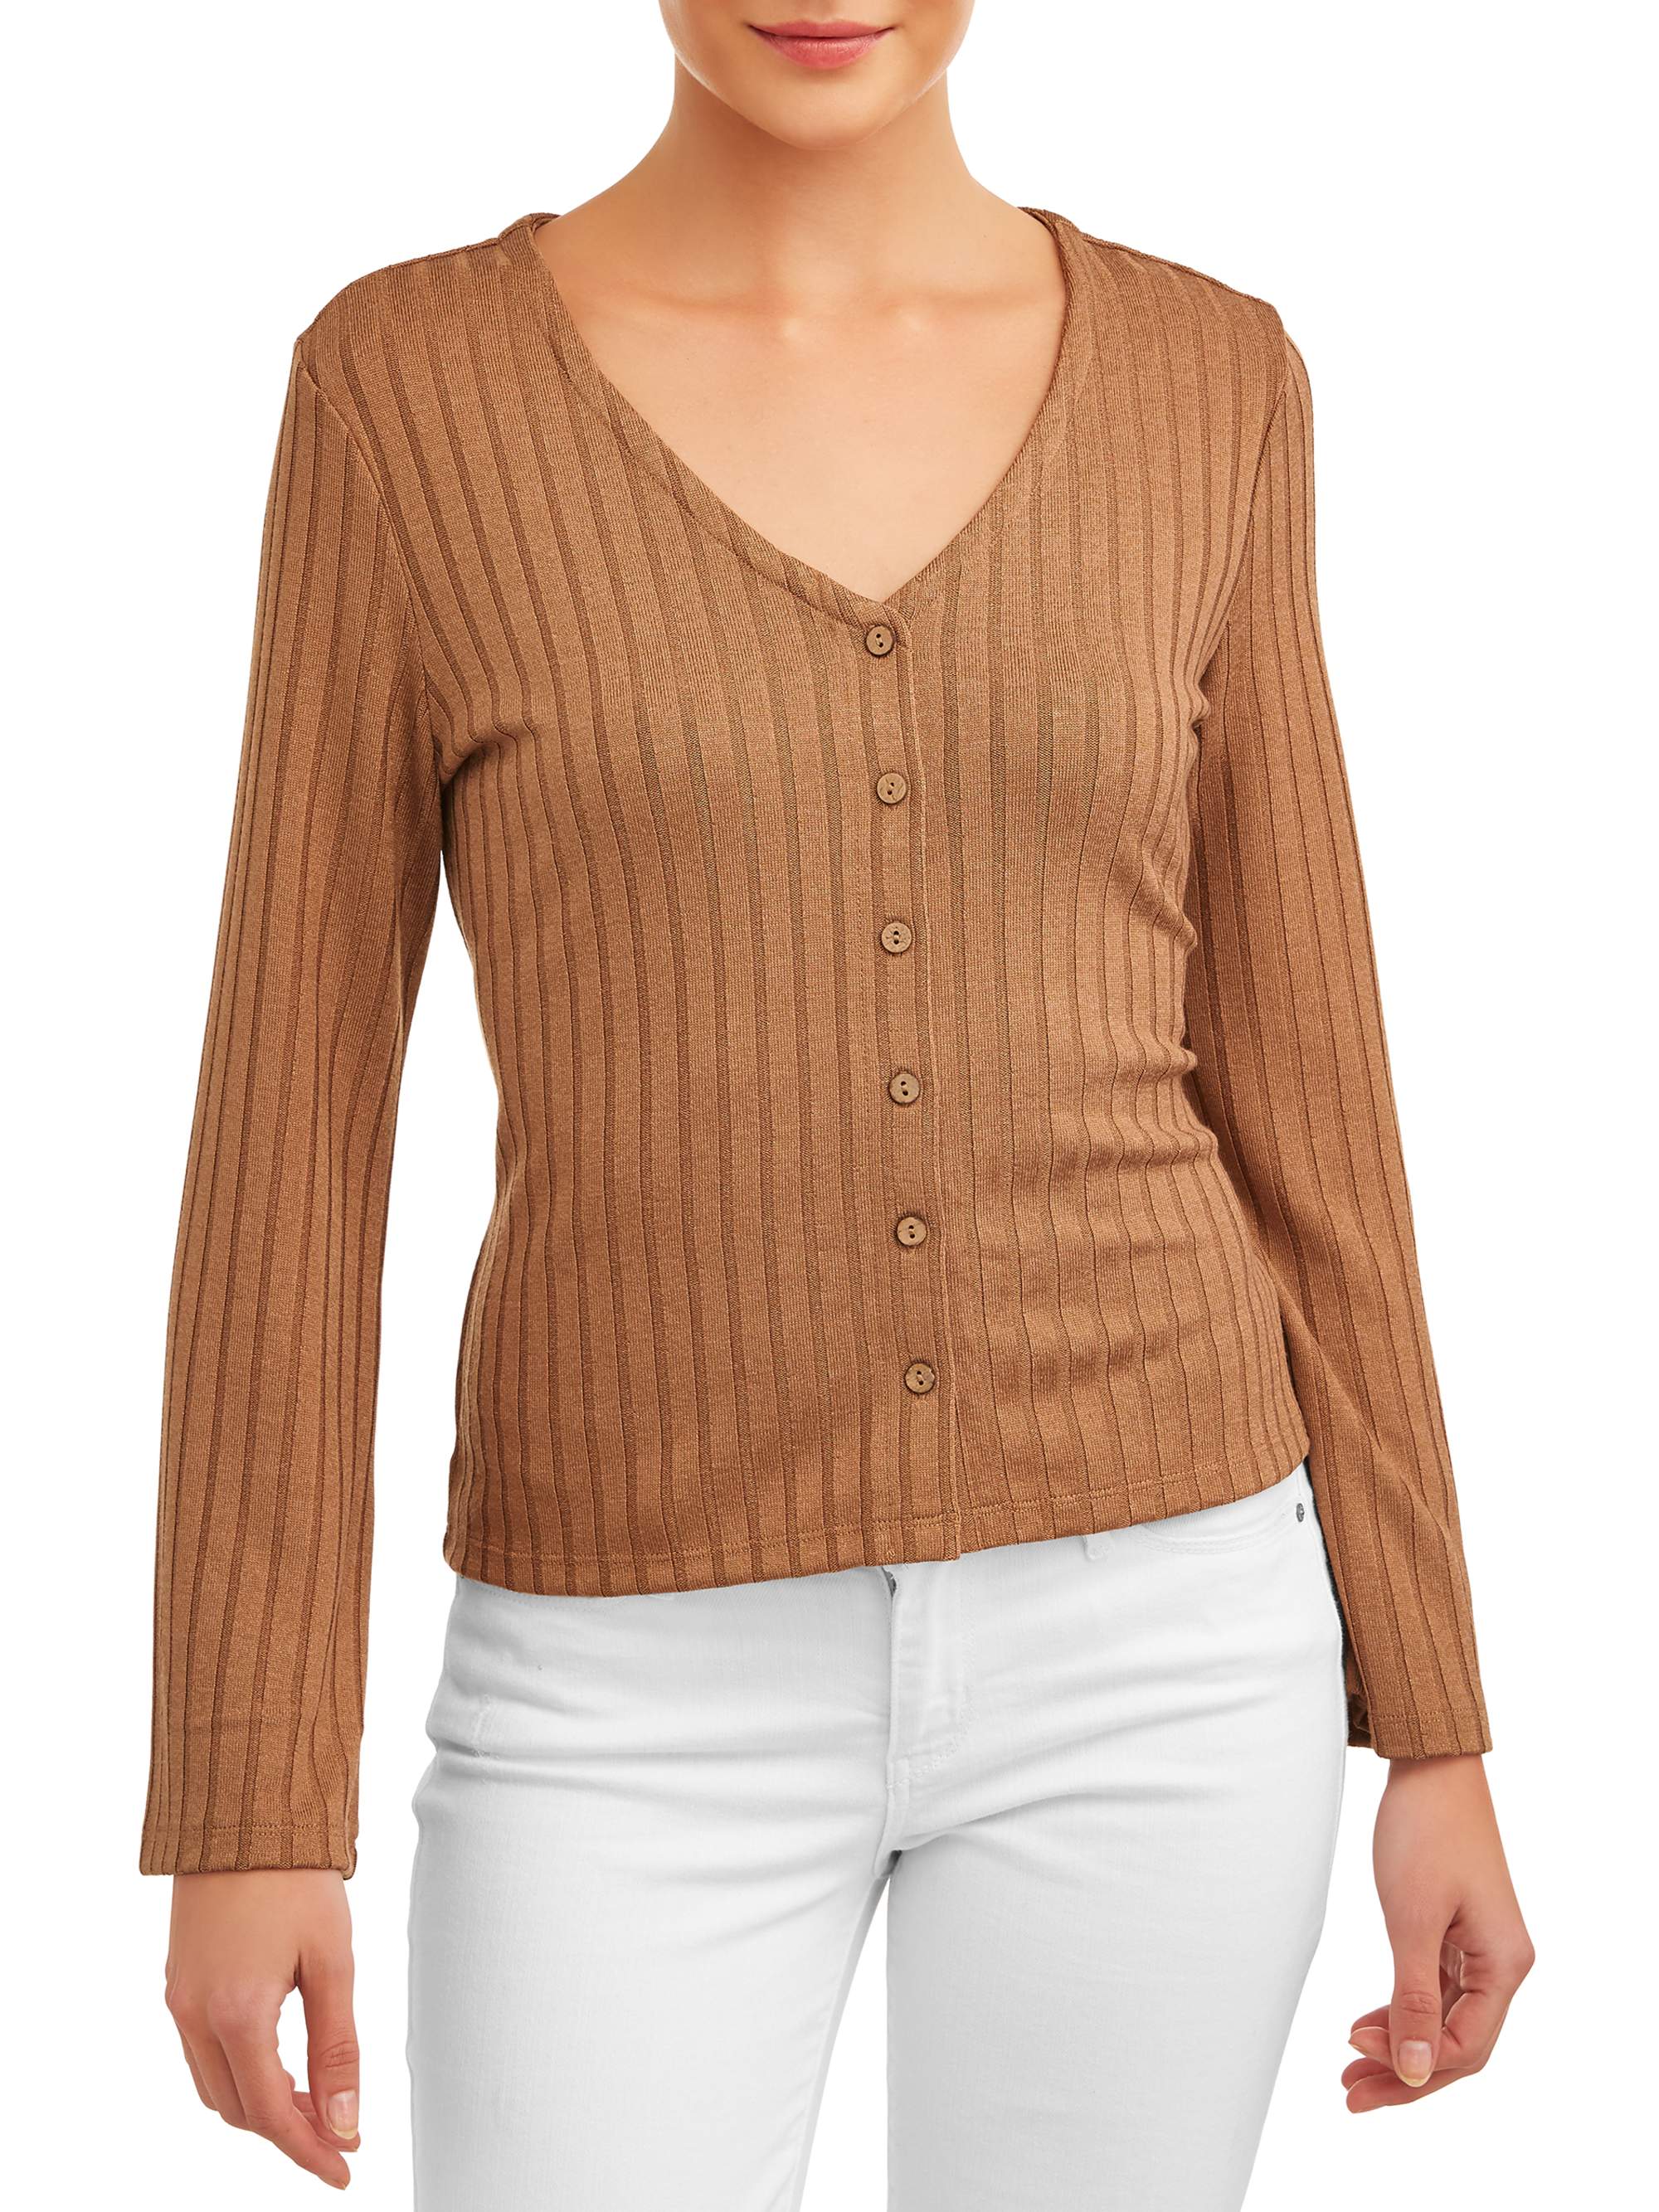 Women's Rib Button Front T-Shirt - image 1 of 4